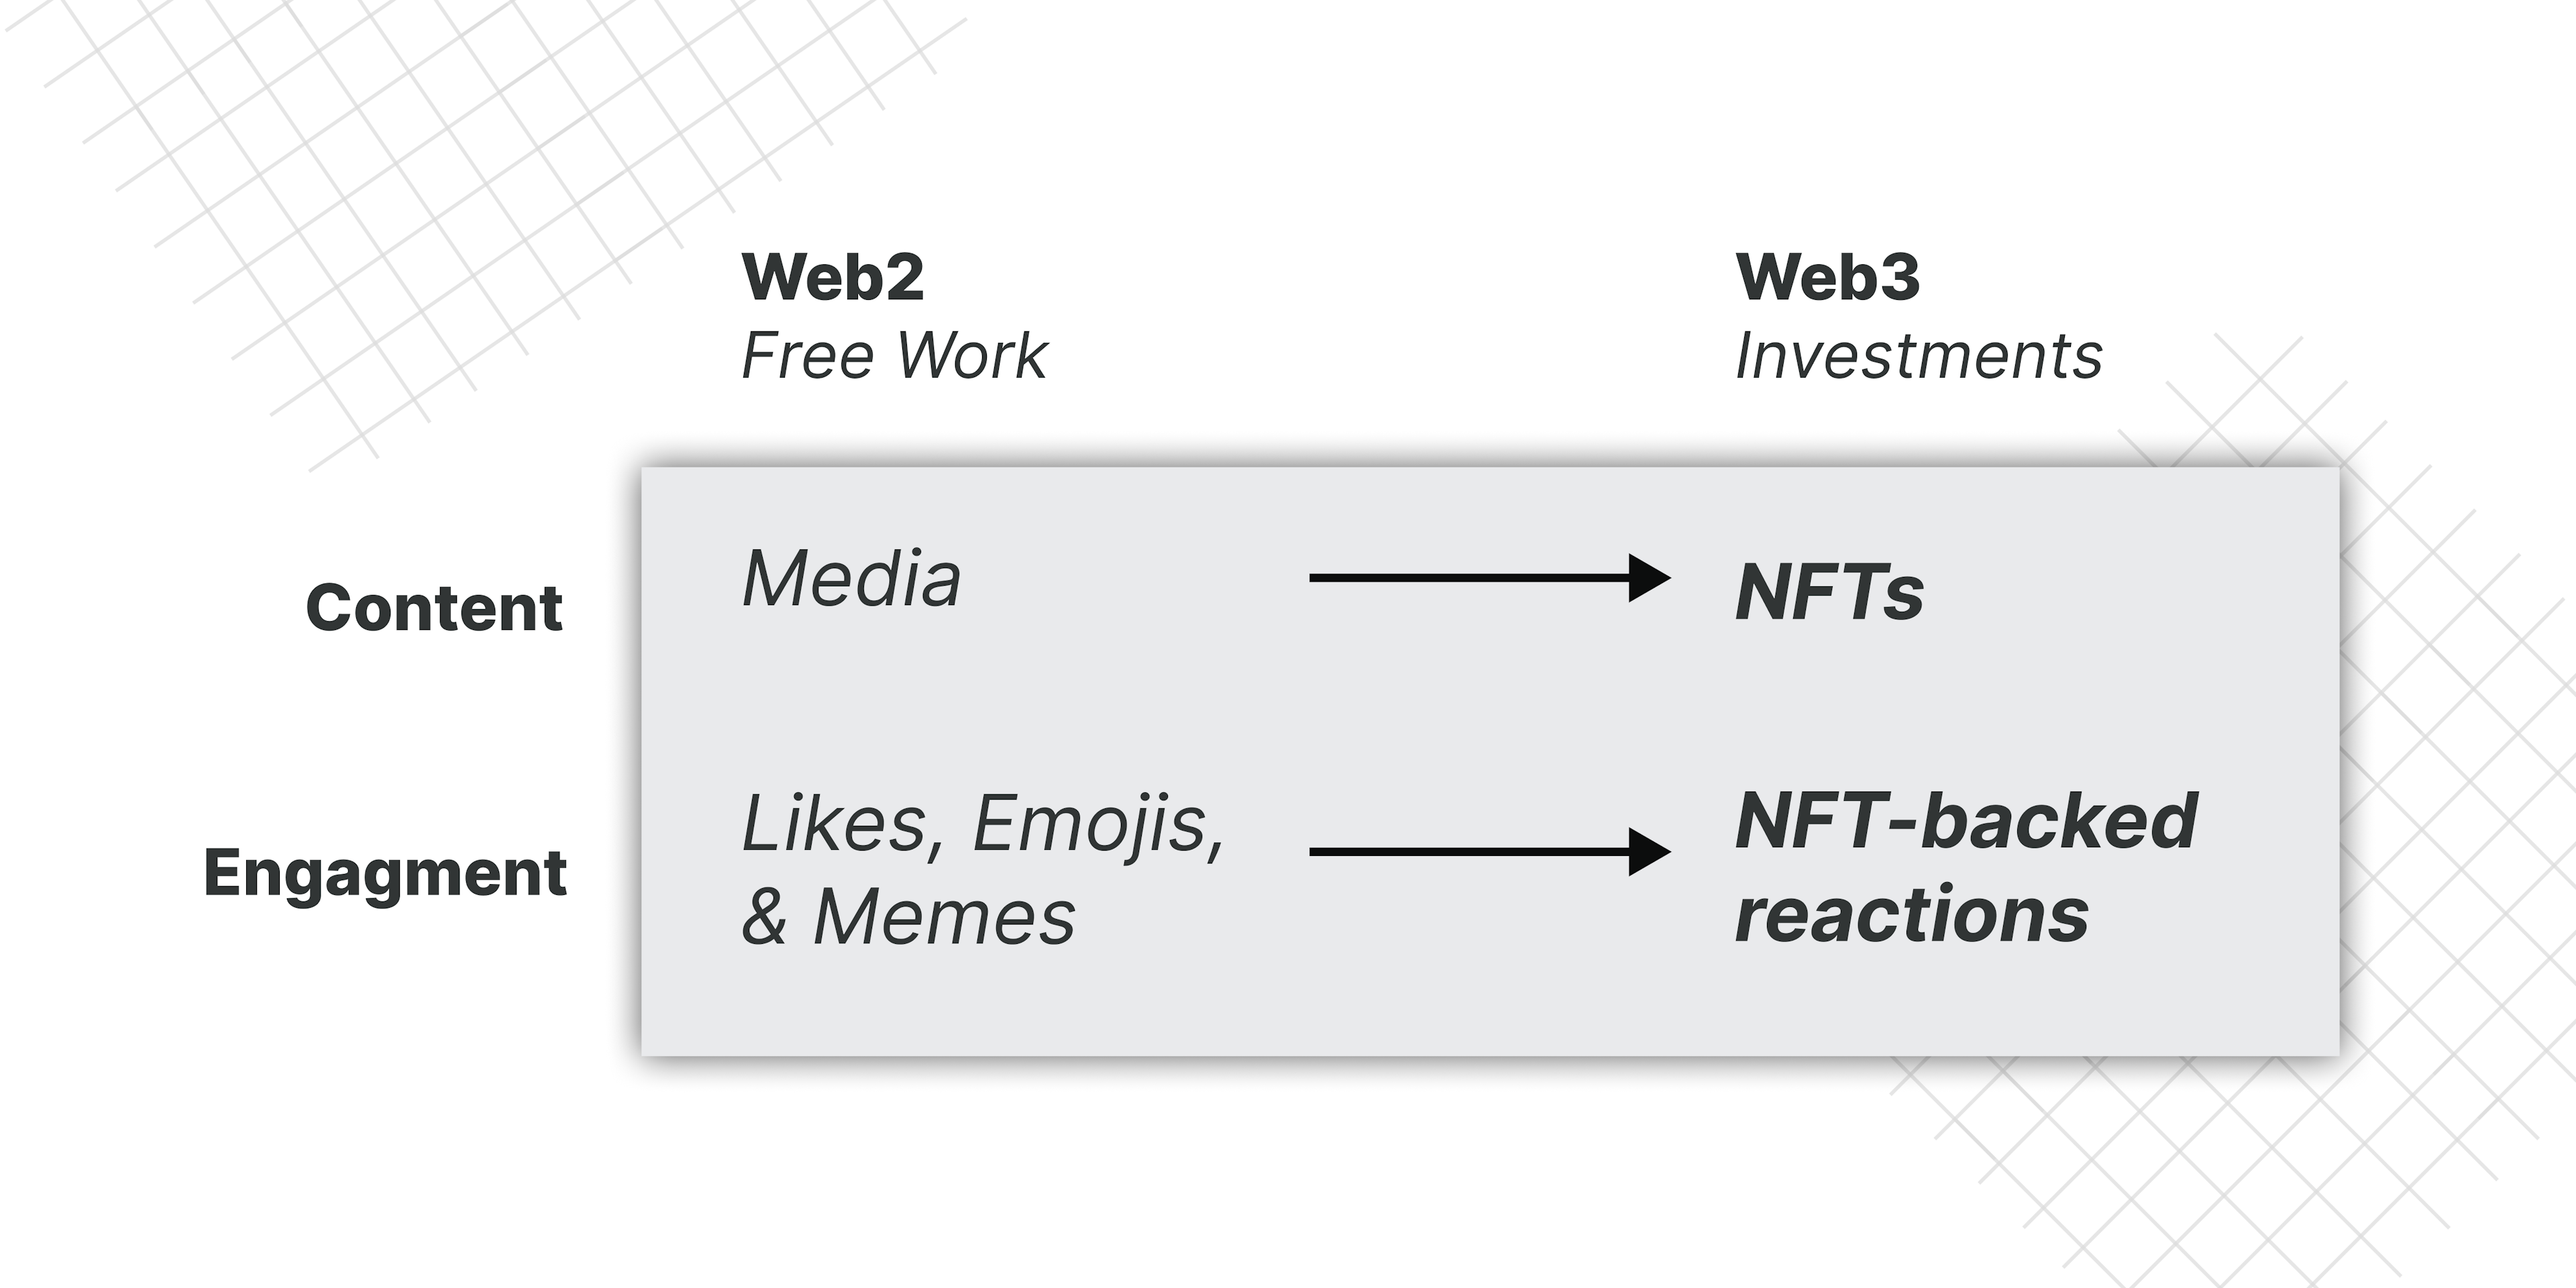 Web3 turns media into NFTs and engagement into NFT-backed reactions.